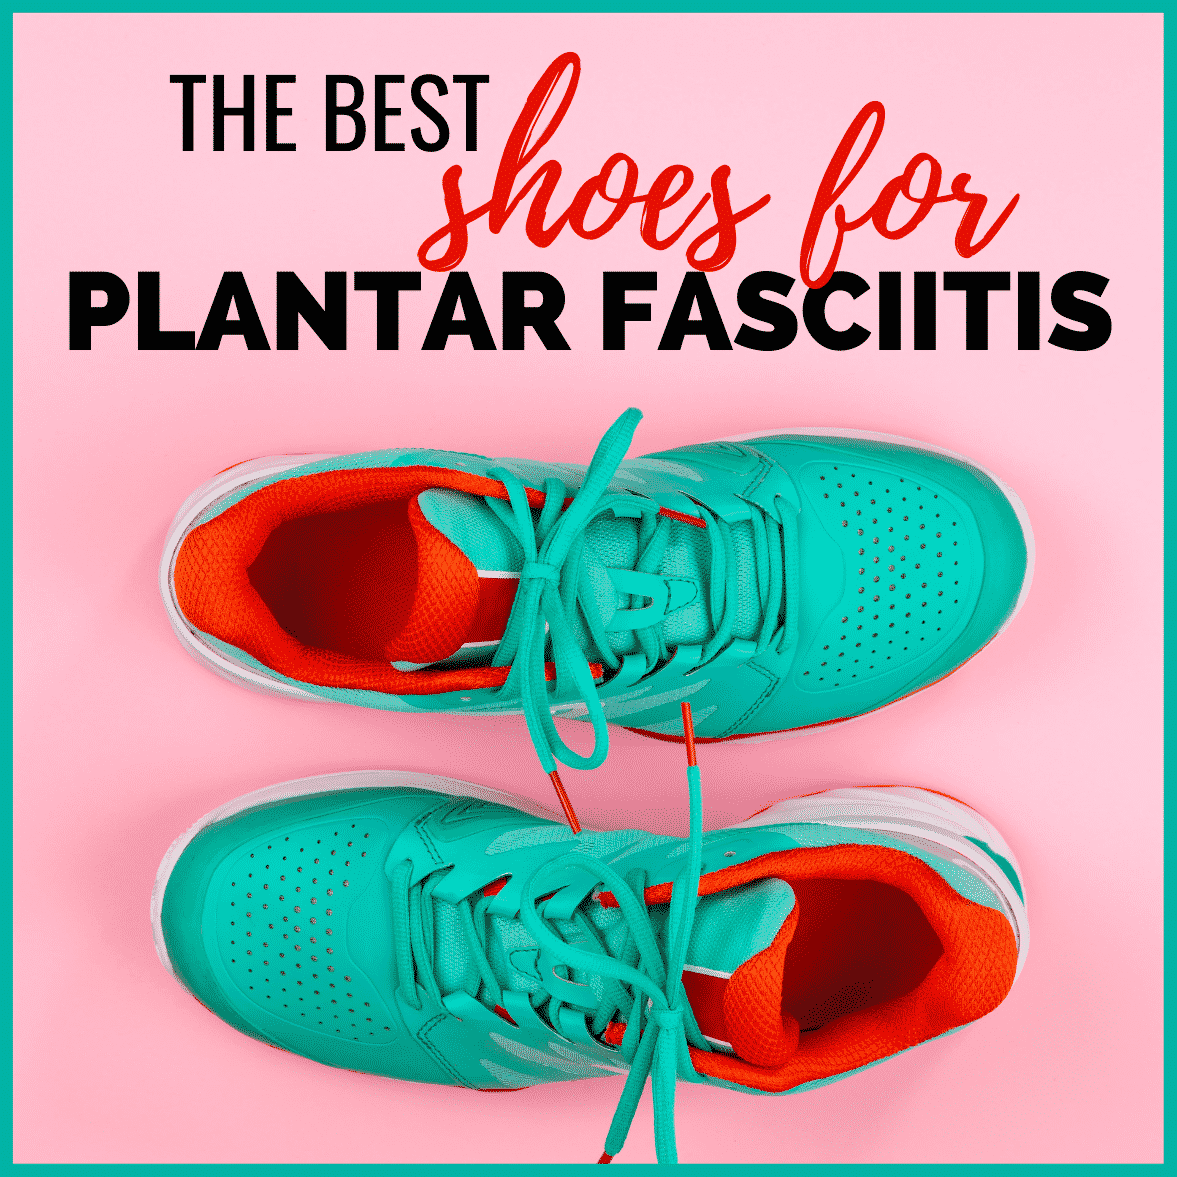 The Best Shoes for Plantar Fasciitis